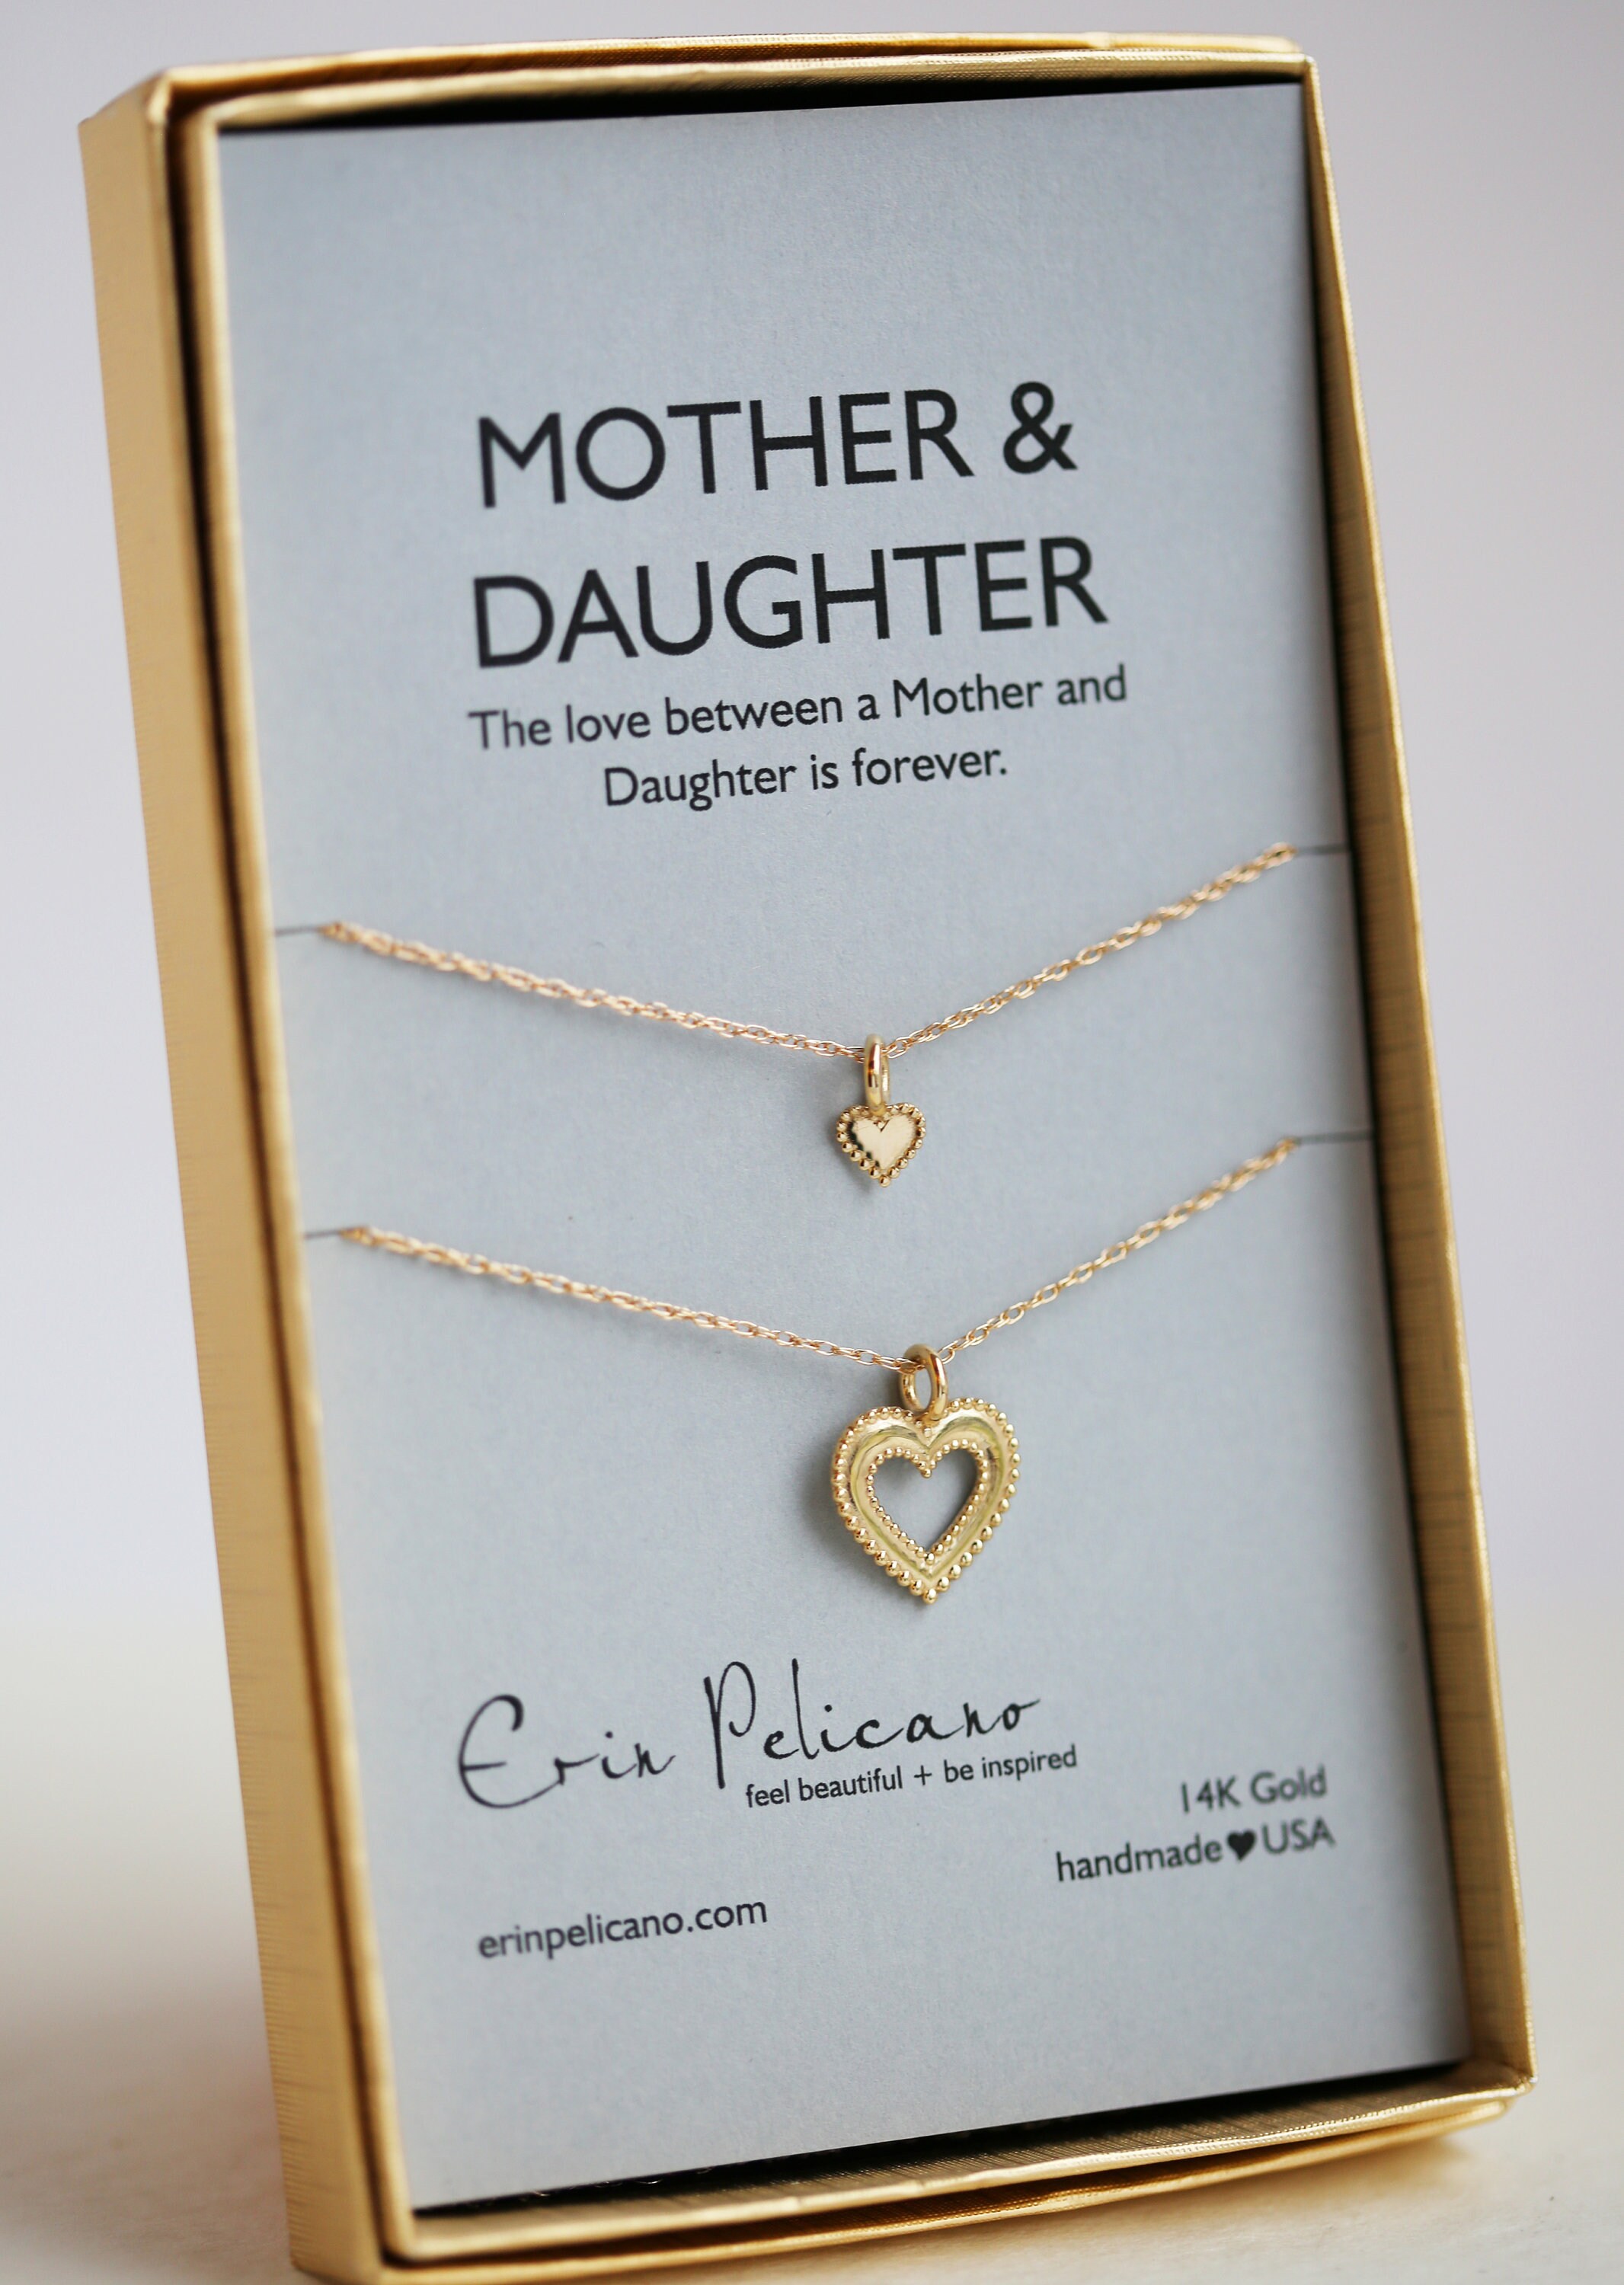 Mother Daughter Heart Necklace made in USA Erin Pelicano